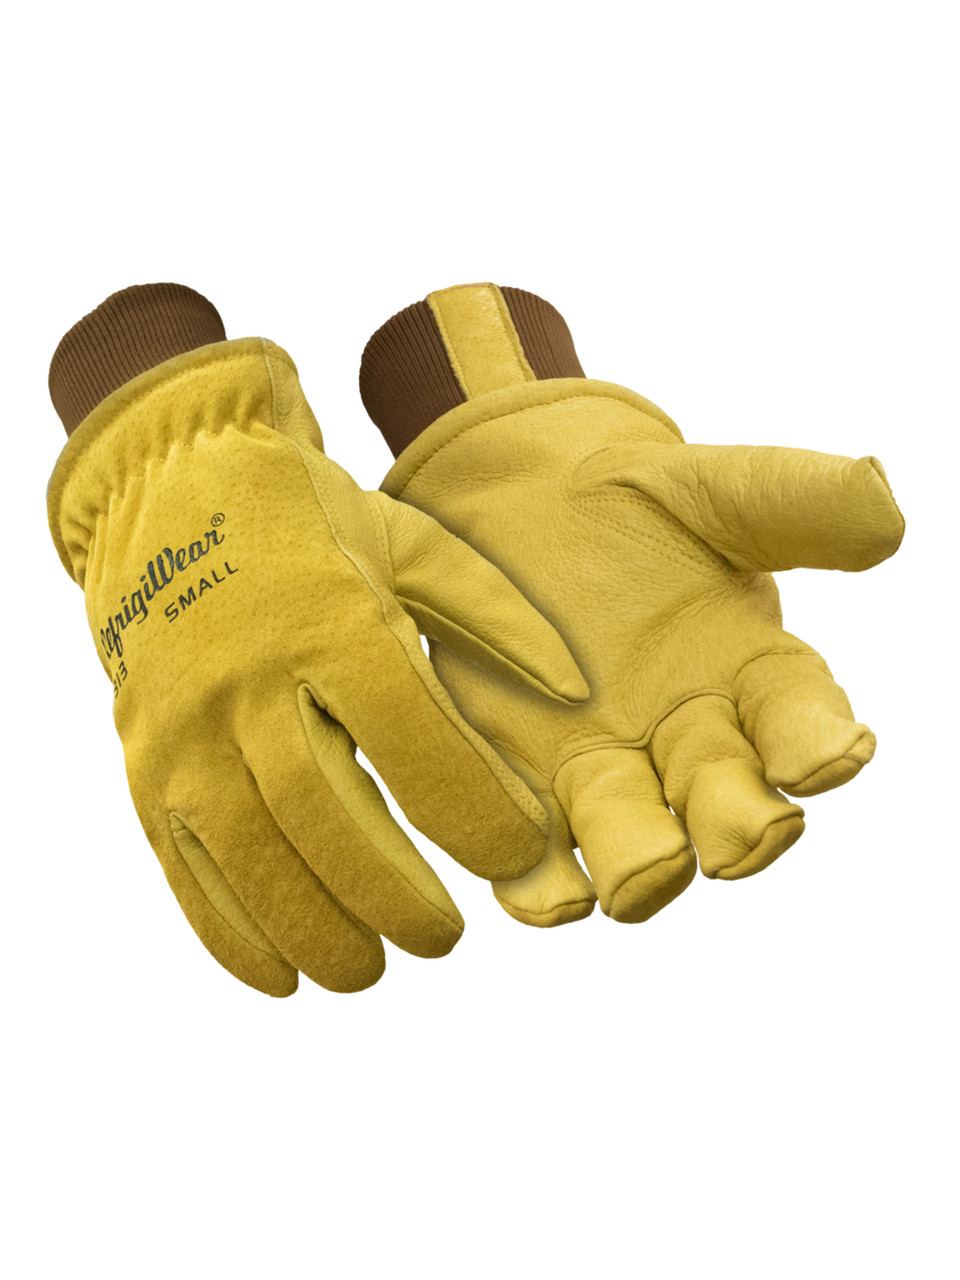 RefrigiWear Insulated Goatskin Leather Gloves from Columbia Safety